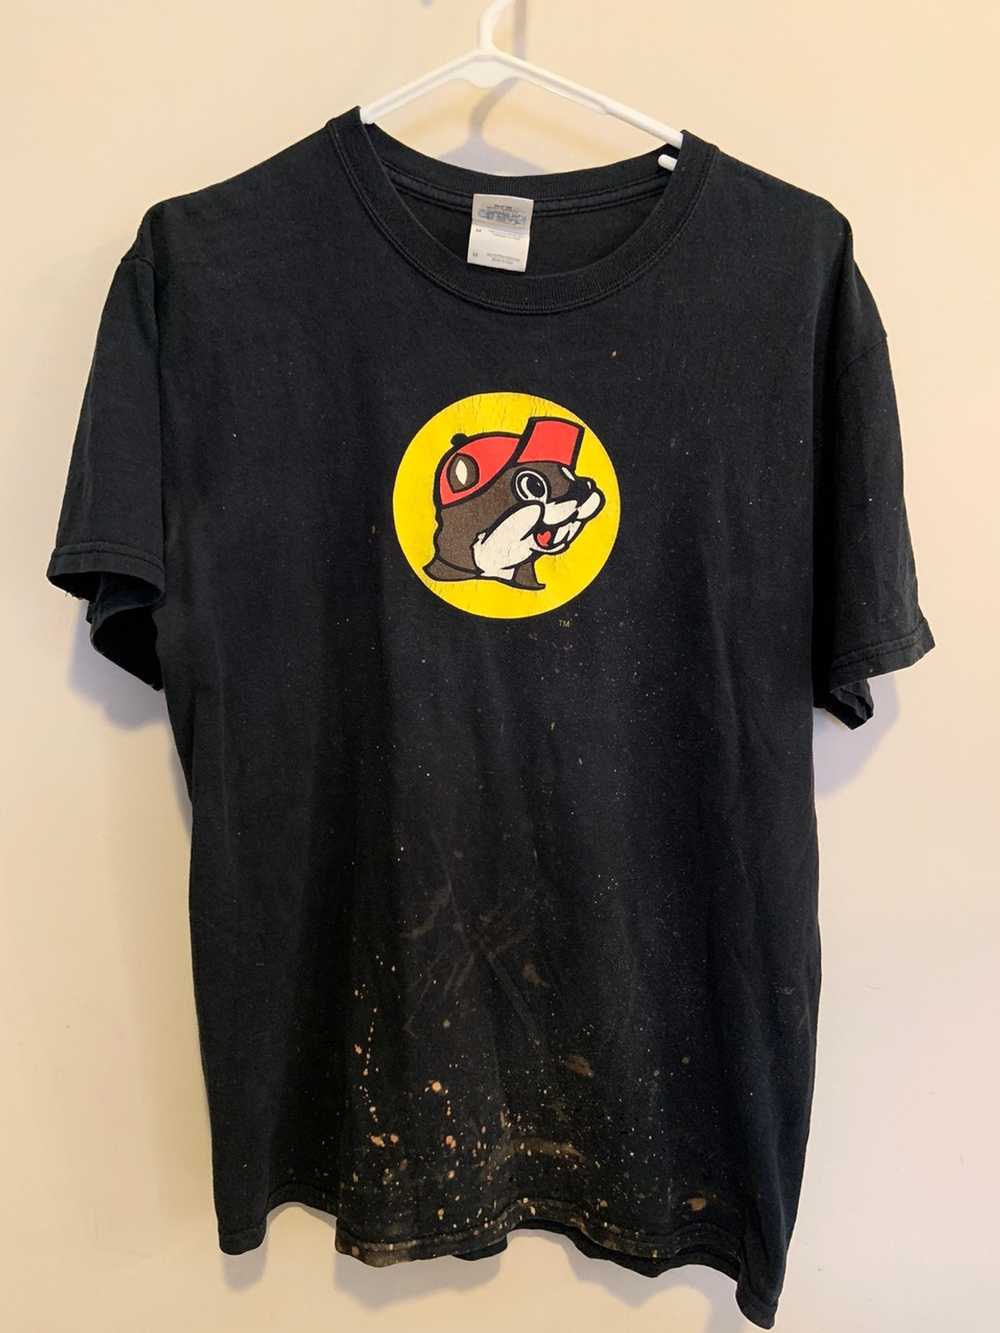 Vintage Buc-ee’s shirt *Bleached and Tattered* - Gem